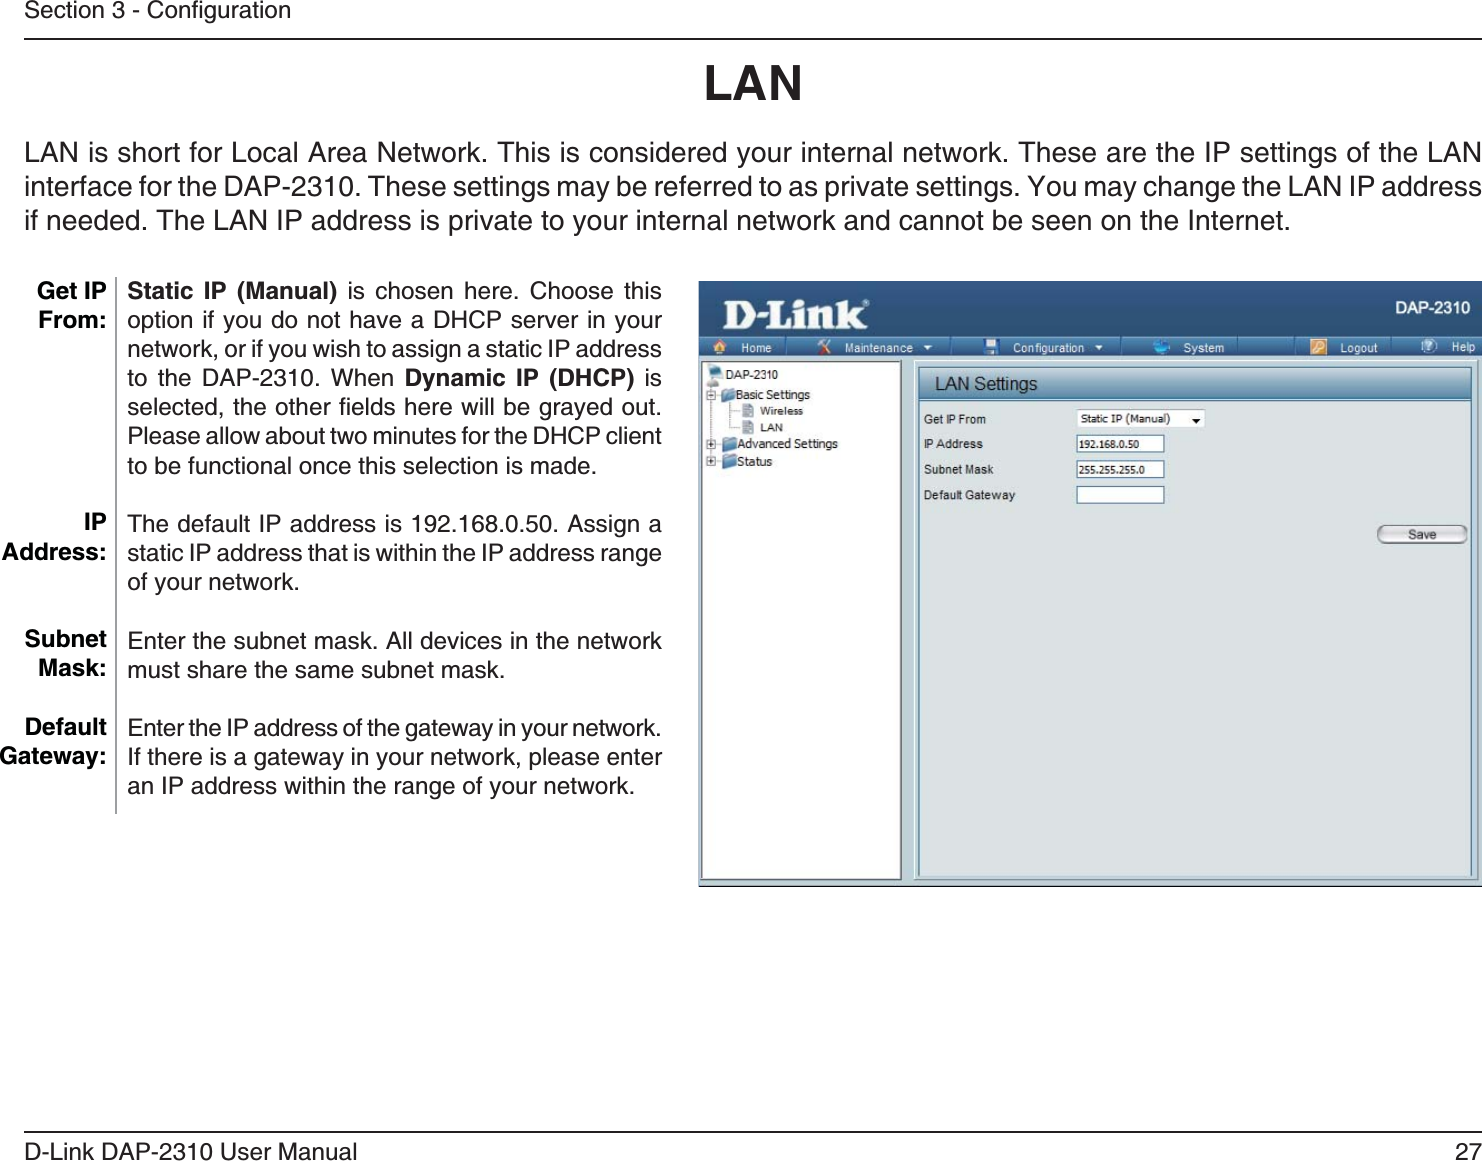 27D-Link DAP-2310 User ManualStatic IP (Manual) is chosen here. Choose this option if you do not have a DHCP server in your network, or if you wish to assign a static IP address to the DAP-2310. When Dynamic IP (DHCP) is Please allow about two minutes for the DHCP client to be functional once this selection is made. The default IP address is 192.168.0.50. Assign a static IP address that is within the IP address range of your network.Enter the subnet mask. All devices in the network must share the same subnet mask.Enter the IP address of the gateway in your network. If there is a gateway in your network, please enter an IP address within the range of your network.LAN Get IP From:IP Address:Subnet Mask:Default Gateway: LAN is short for Local Area Network. This is considered your internal network. These are the IP settings of the LAN if needed. The LAN IP address is private to your internal network and cannot be seen on the Internet.